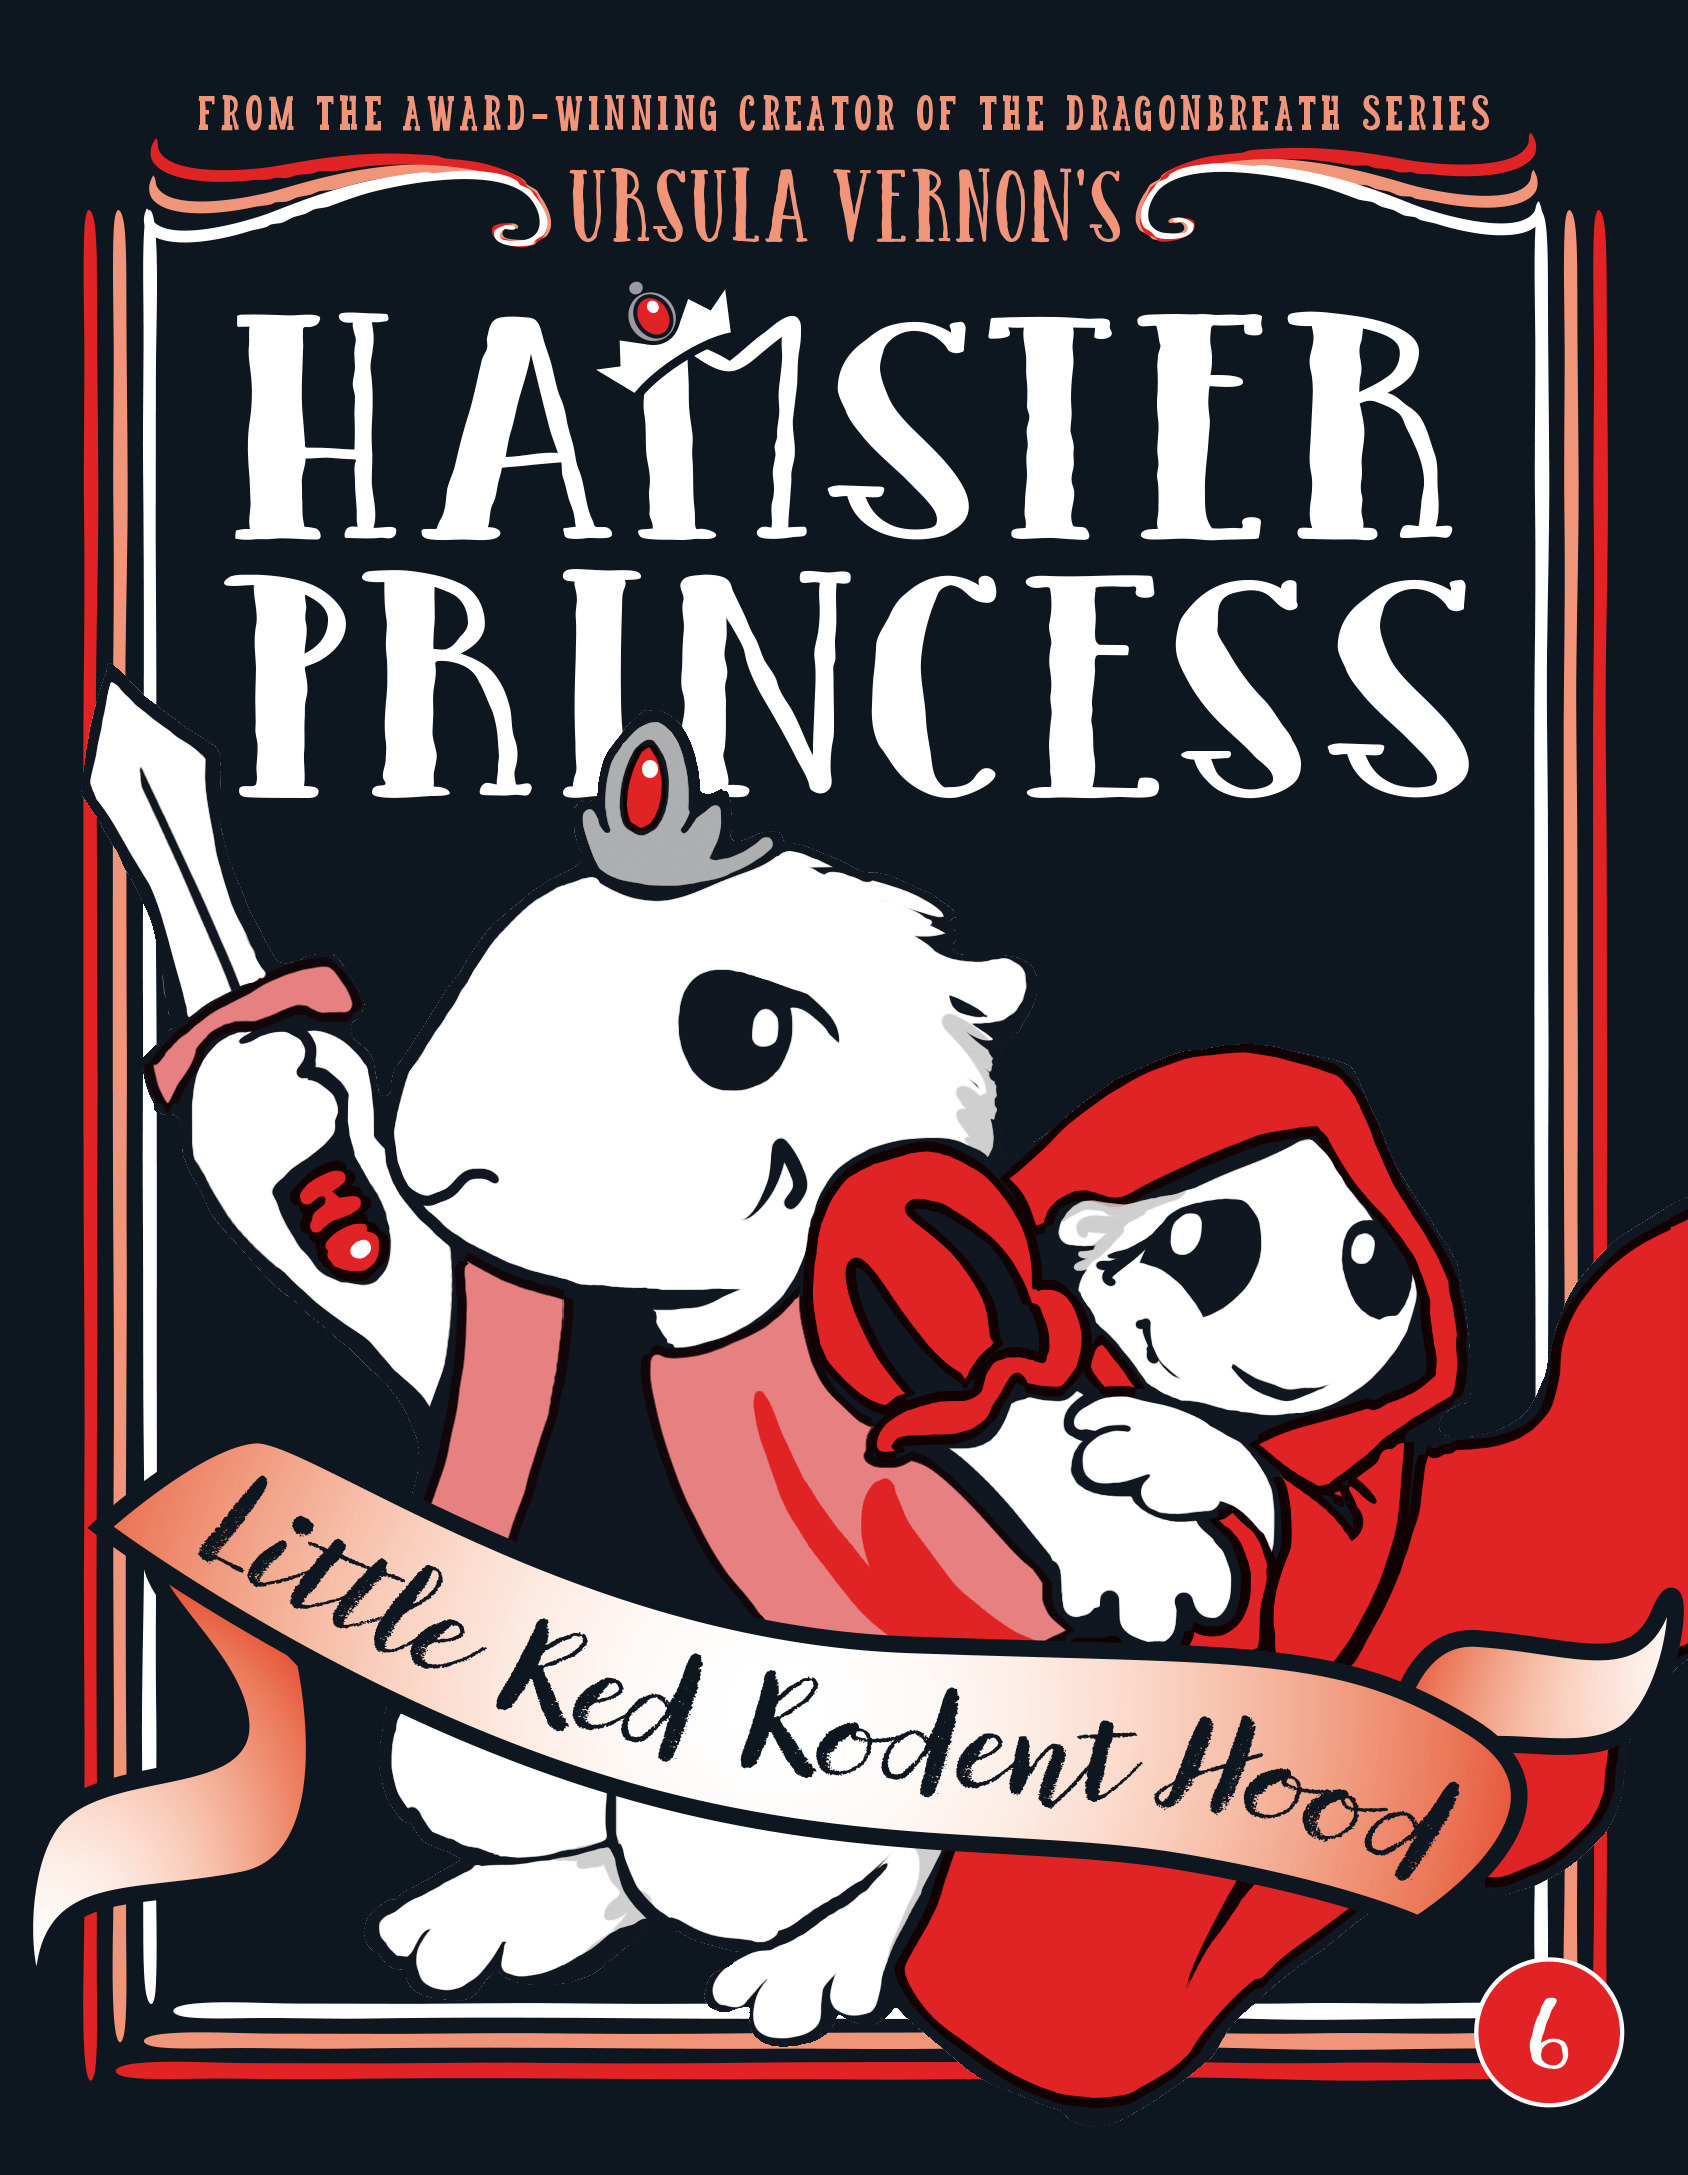 Hamster Princess: Little Red Rodent Hood (Hardcover Book)